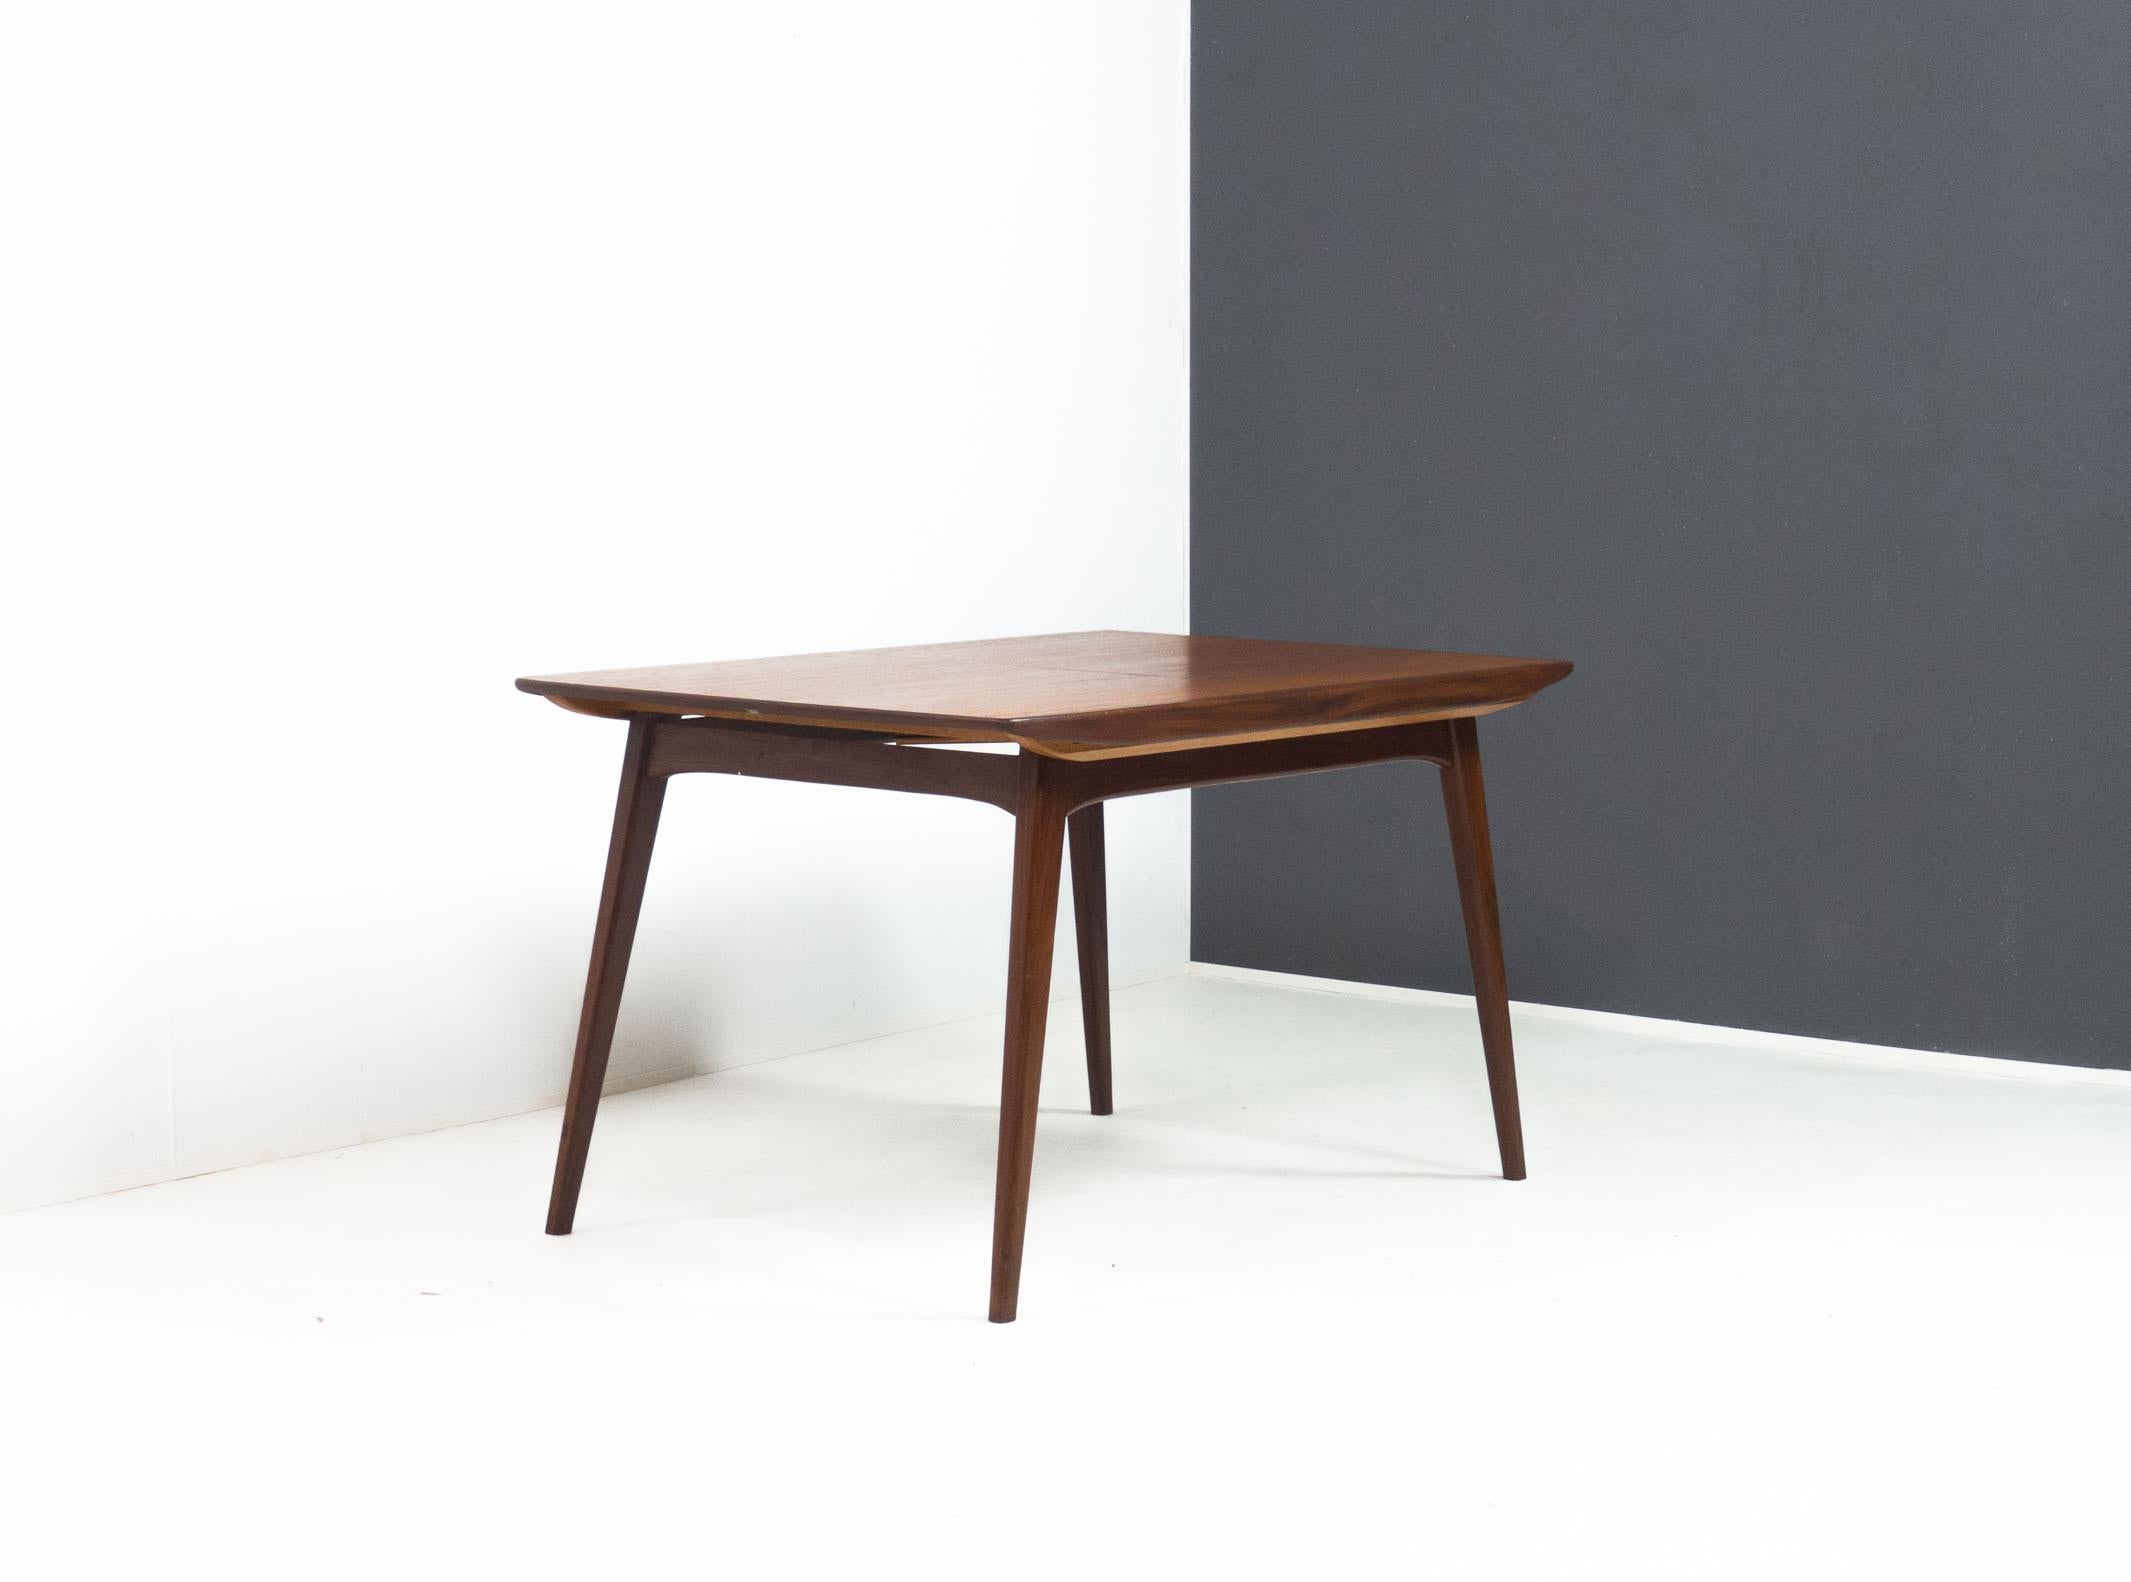 Dining table with model name ‘Milaan’, designed by Louis van Teeffelen for Wébé Meubelen of the Netherlands in the 1960s.

This table has a top and fold out extension veneered with teak, and thick edge banding and frame made from solid afrormosia or